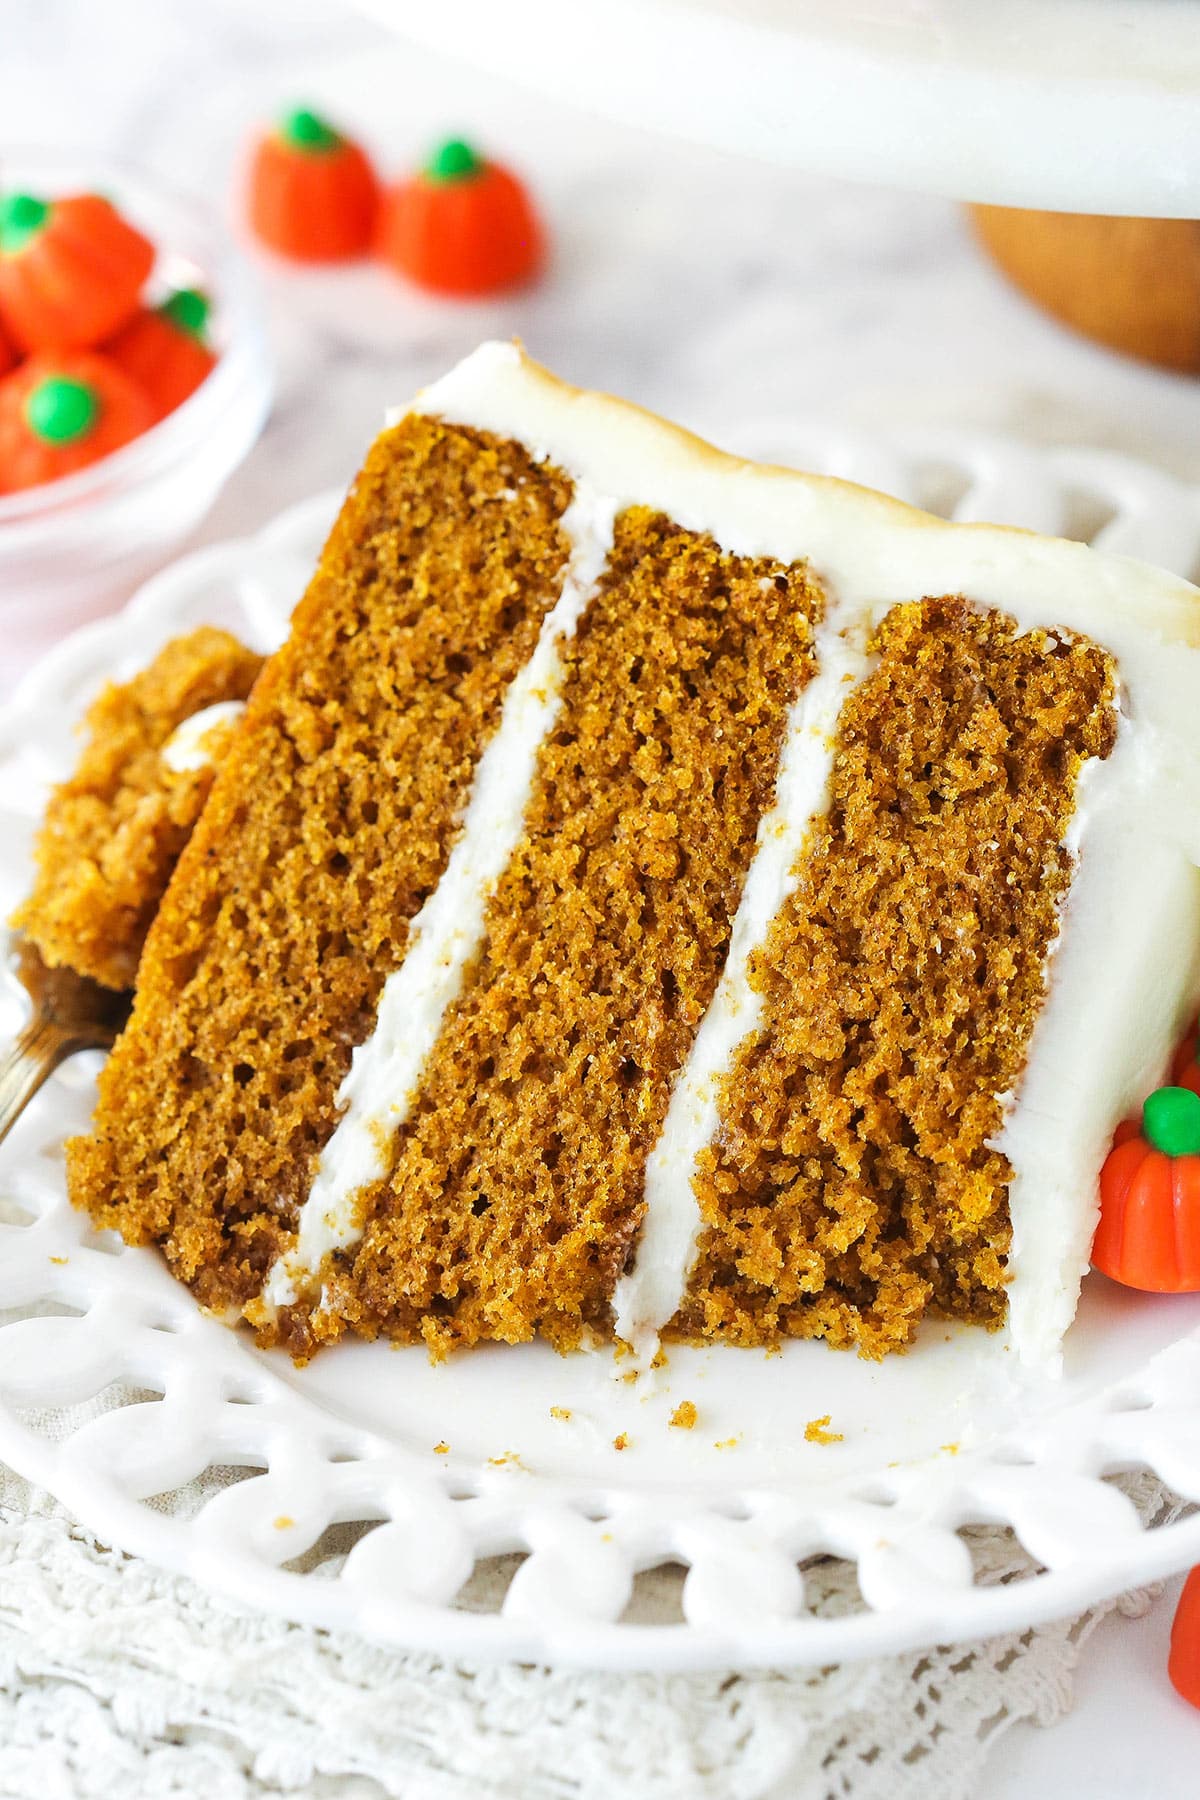 A slice of pumpkin layer cake on a plate with a bite taken out of it.